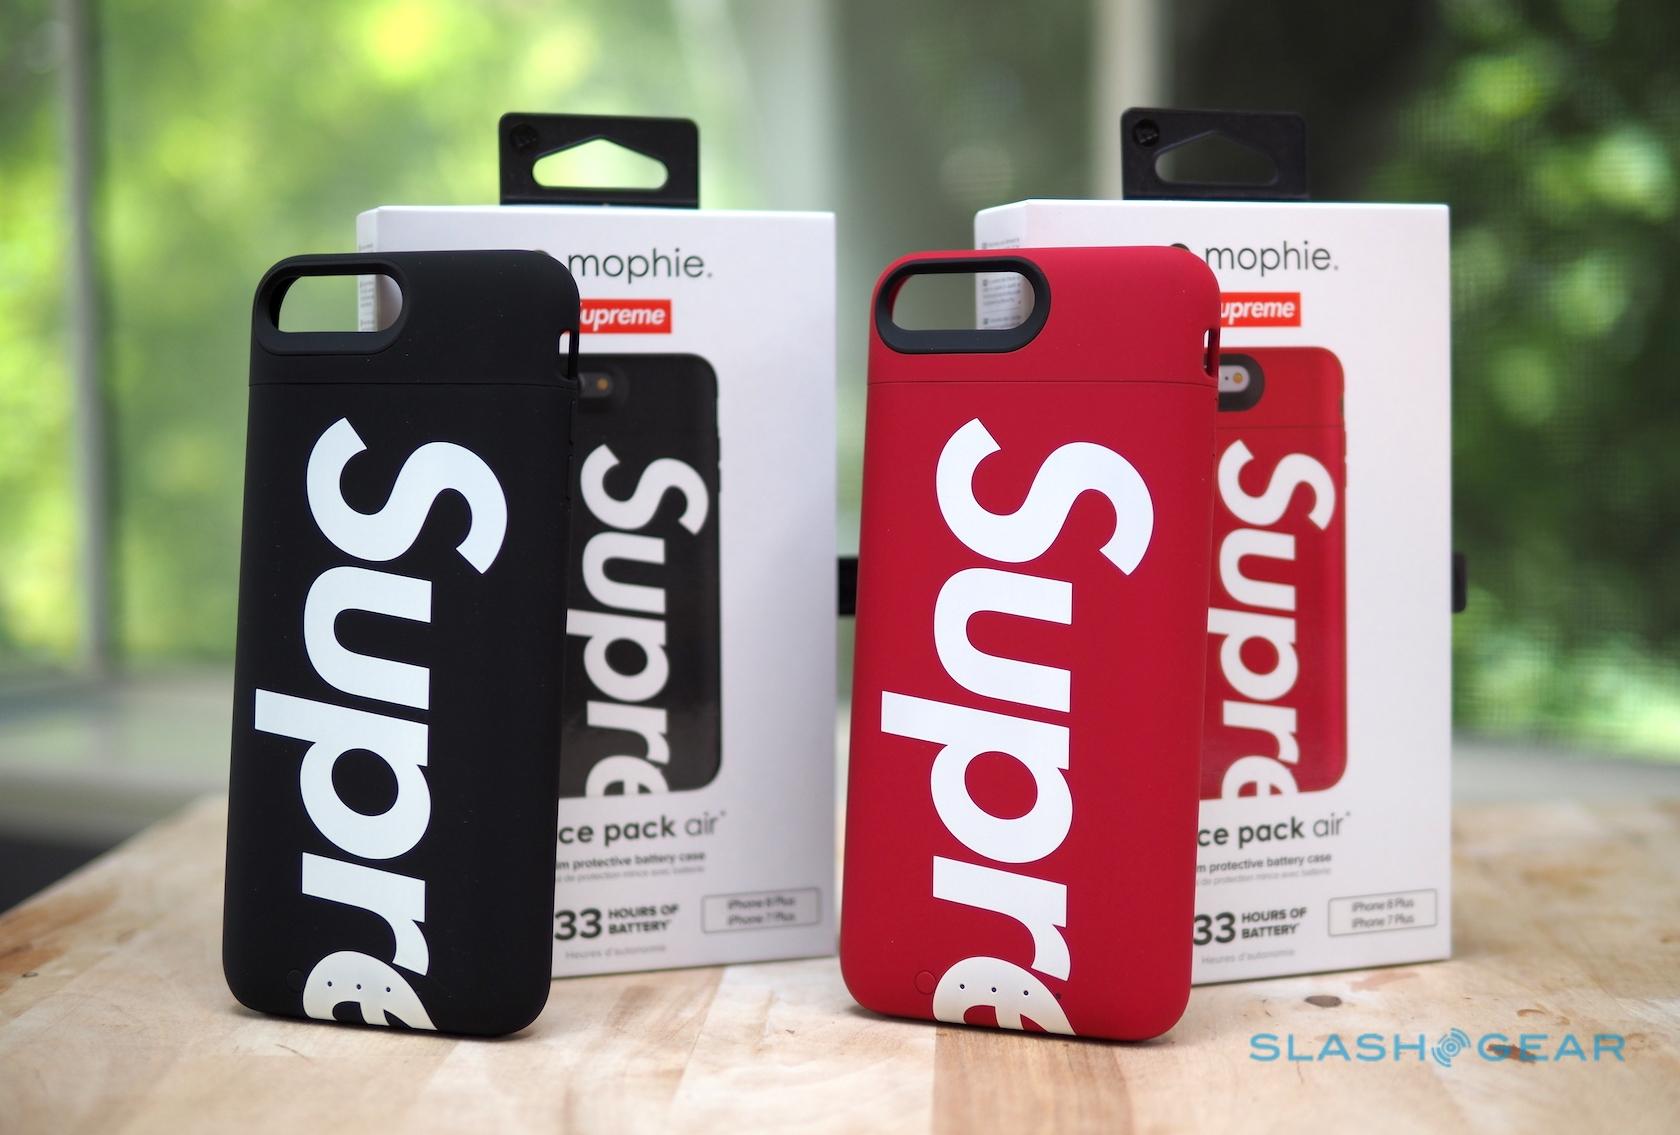 Supreme Phone Case For Iphone 8 Plus - Wallet cases for iphone 8 plus.